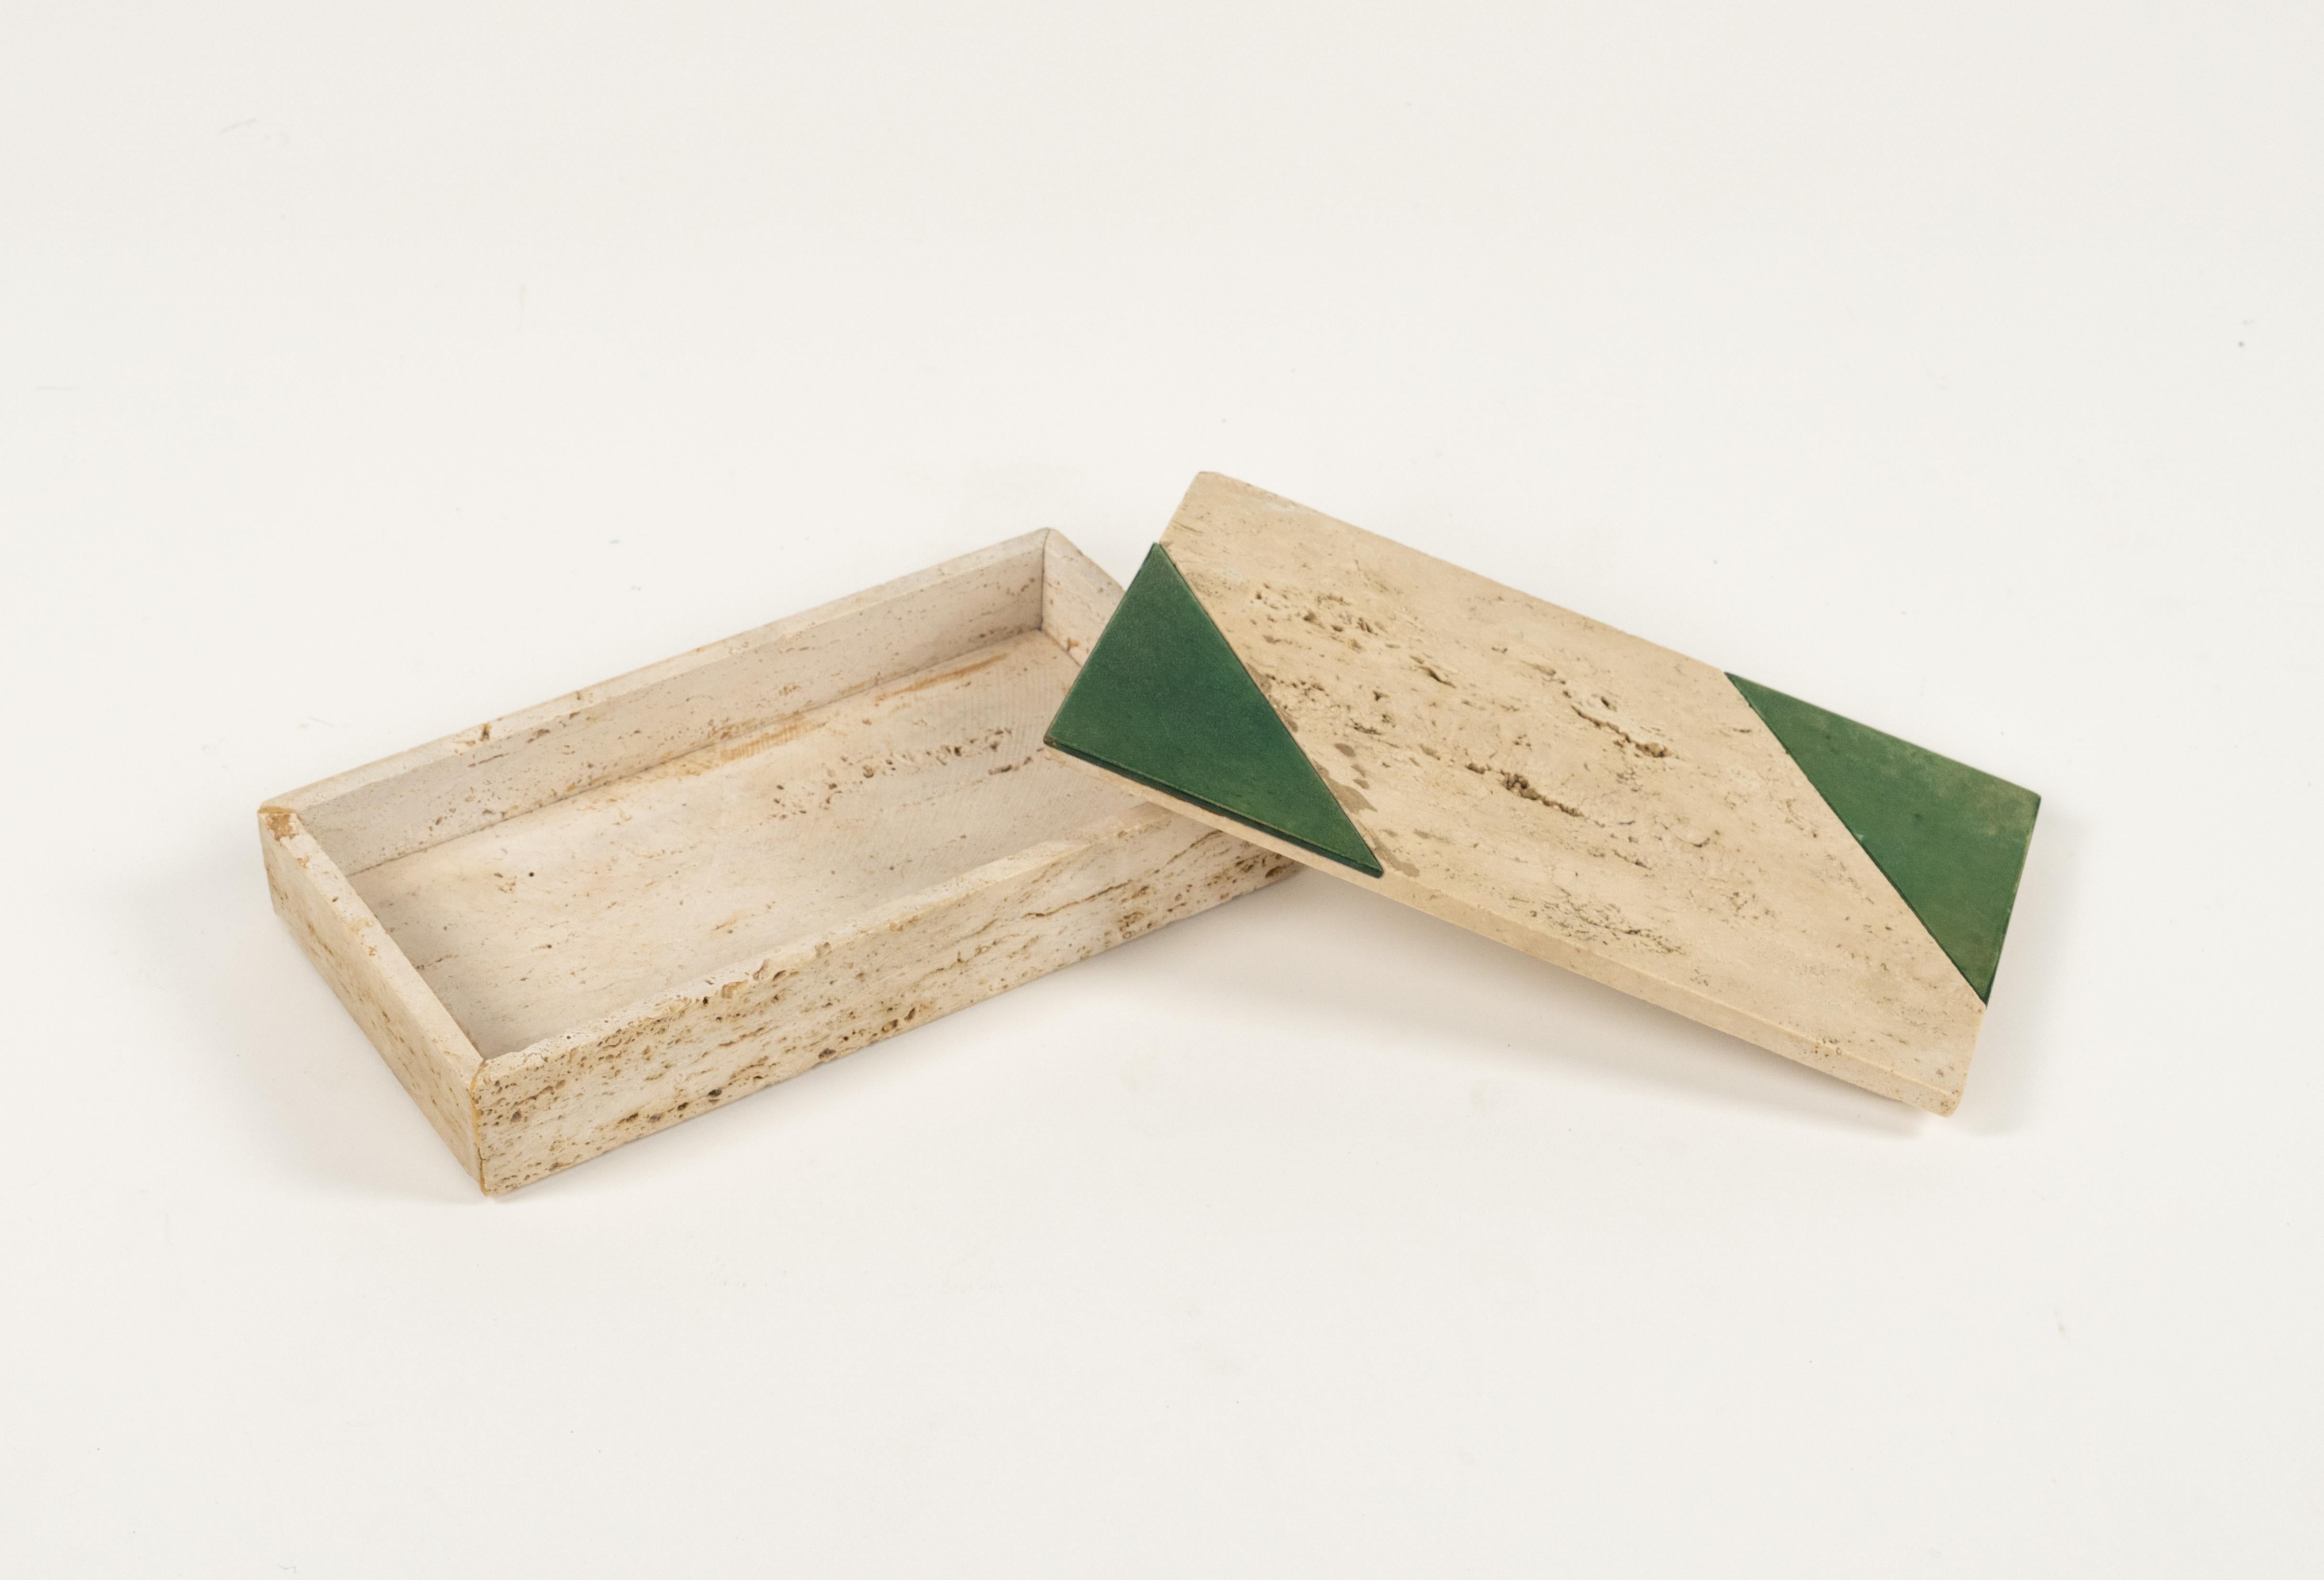 Rectangular Decorative Box in Travertine Fratelli Mannelli Style, Italy 1970s For Sale 6